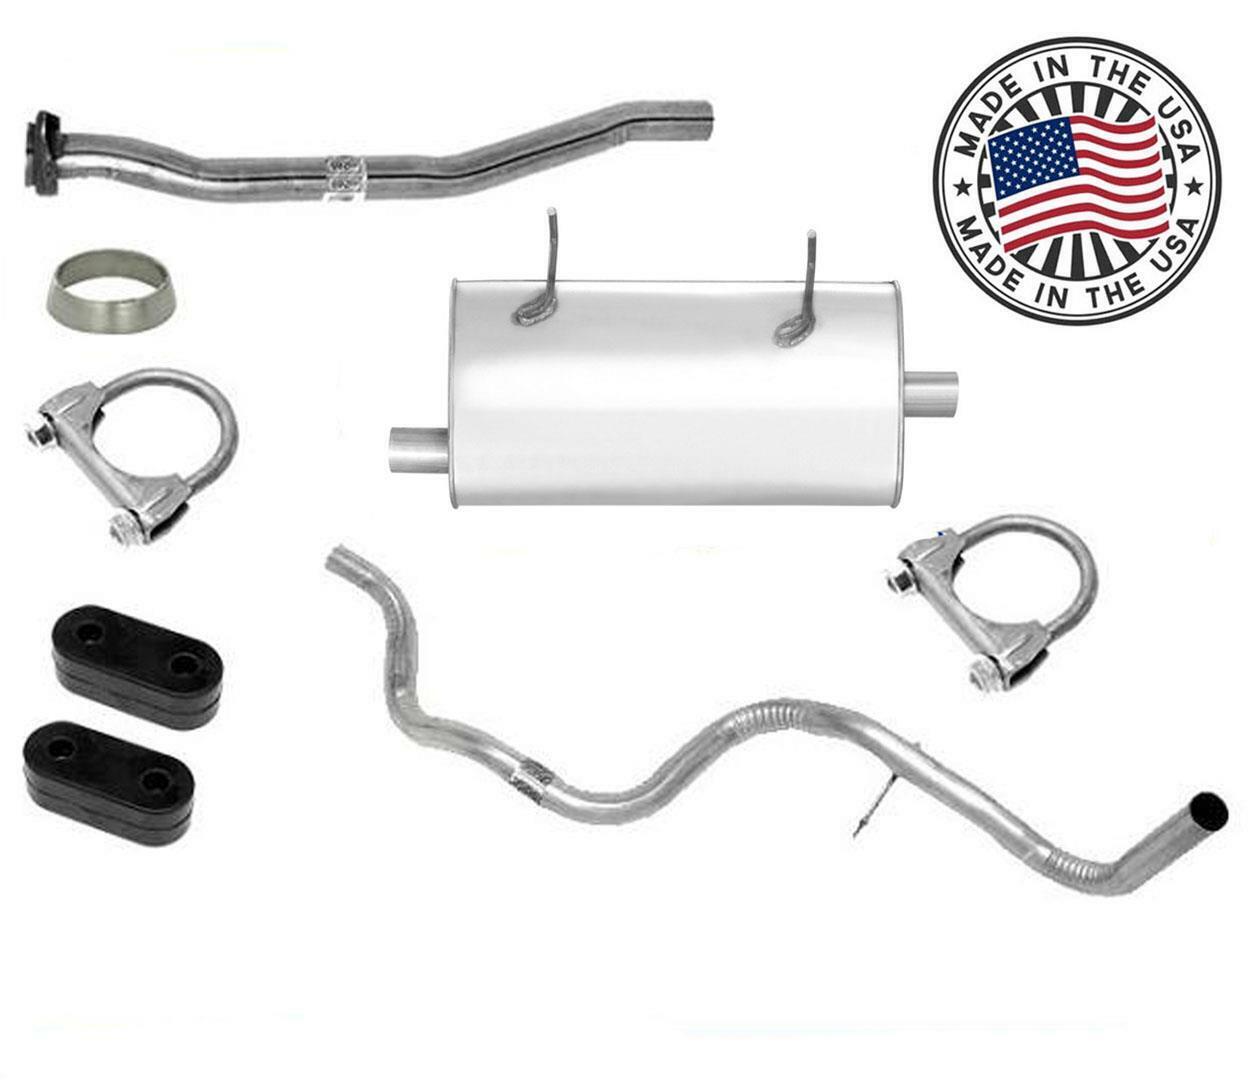 Muffler Exhaust System for Ford Ranger 98-00 Only With 126 Inch Wheel Base